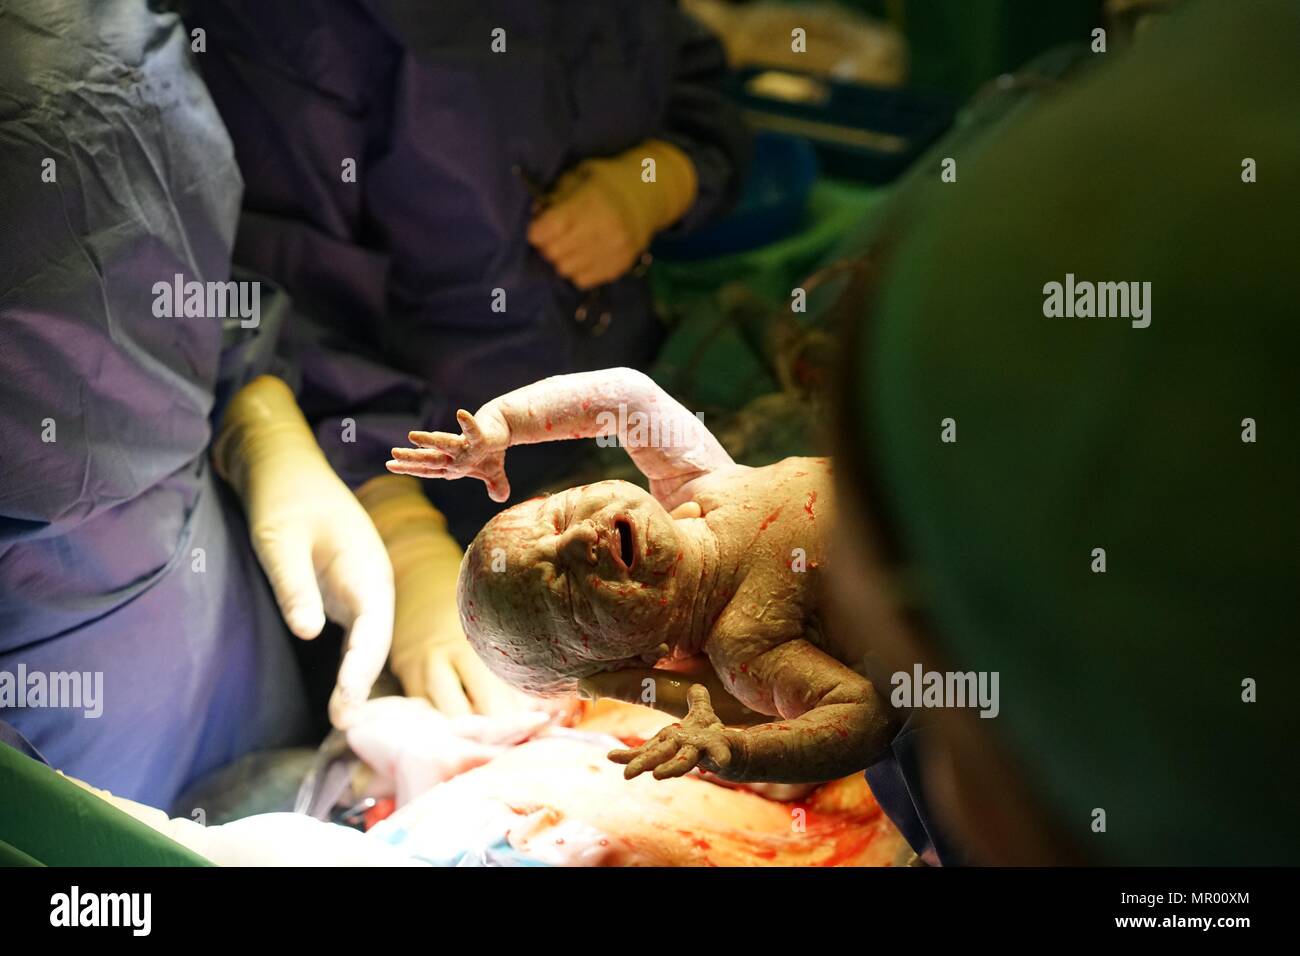 Baby being born by Caesarean section in hospital, covered in vernix, umbilical cord still attached and mother’s surgical wound in background Stock Photo